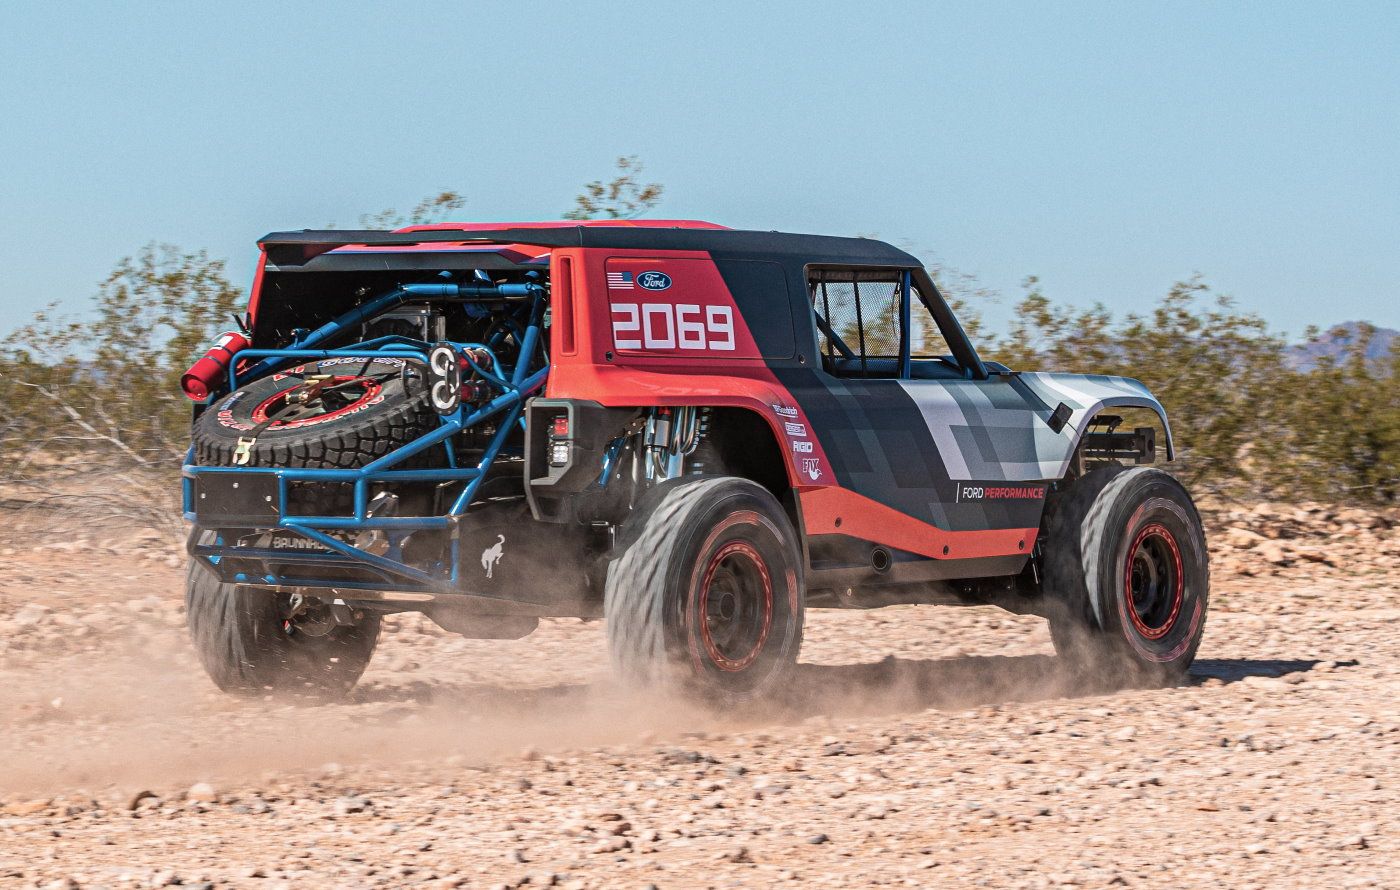 Ford???s Bronco R race prototype debuts in the desert to celebrate 50th anniversary of Rod Hall???s historic Baja 1000 win, an overall victory in a 4x4 that???s never been duplicated in 50 years.